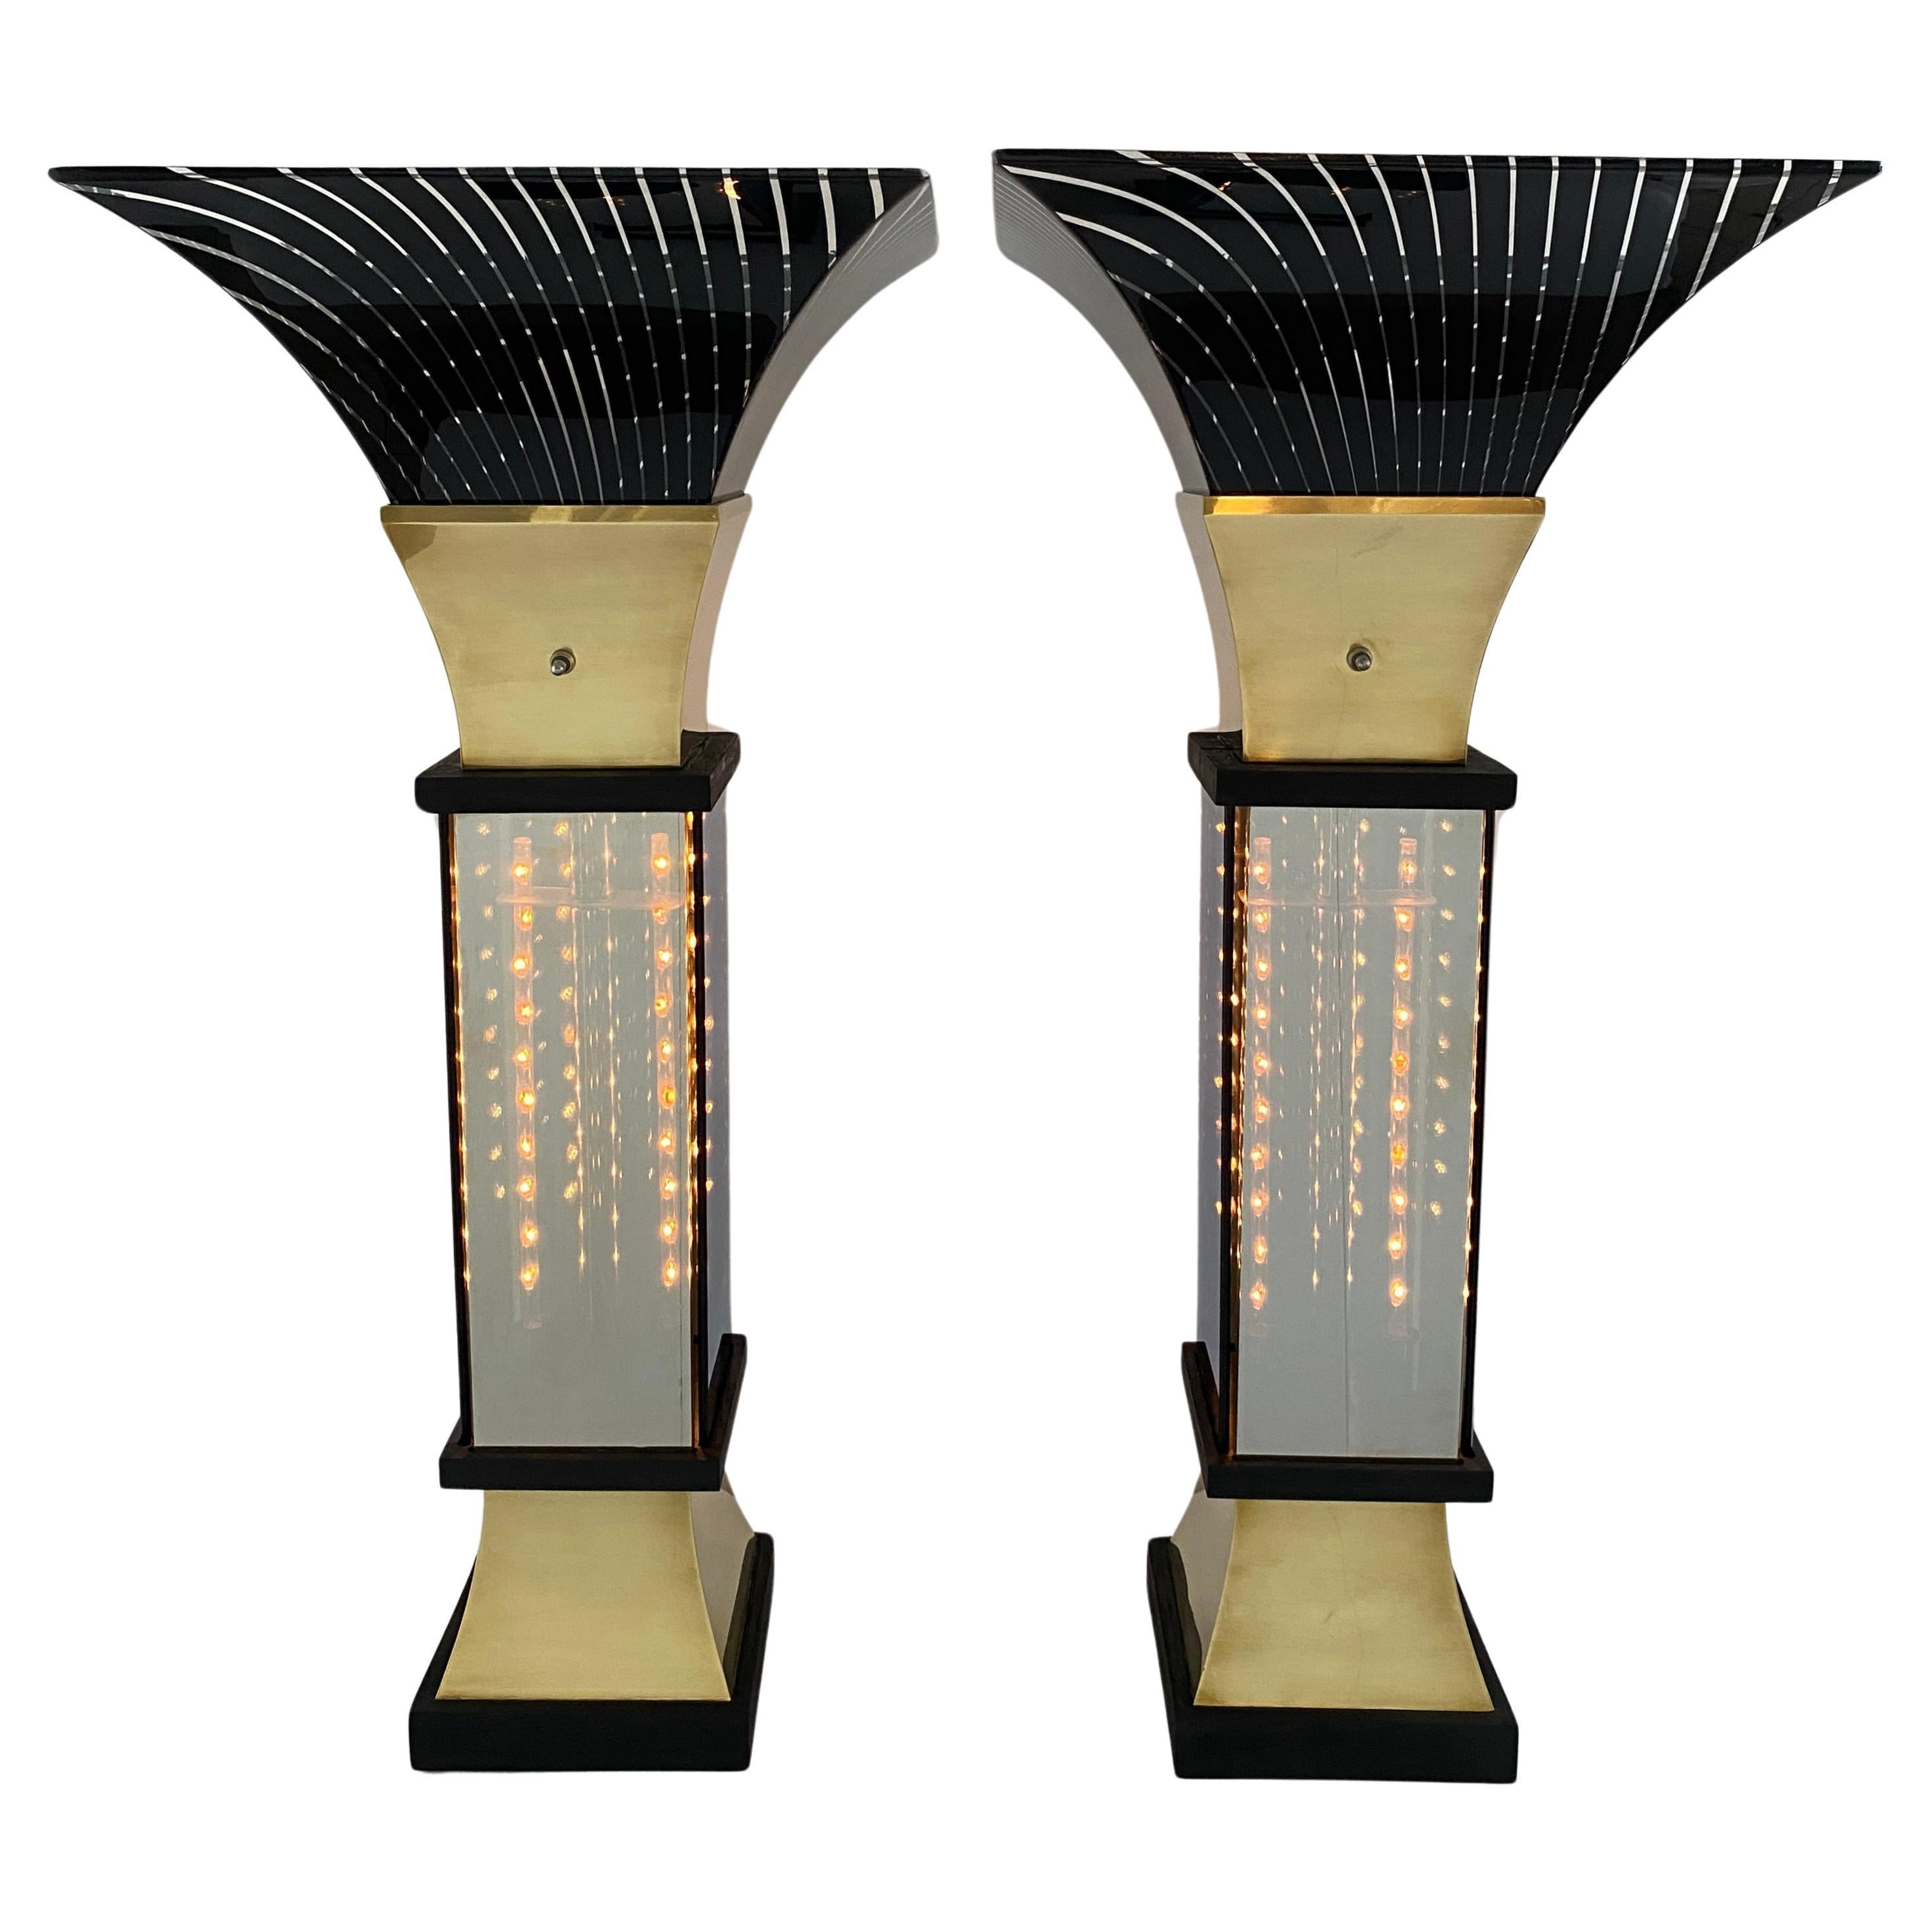 Pair of Brass Torchiere Table Lamps In the Style of Gaetano Scolari